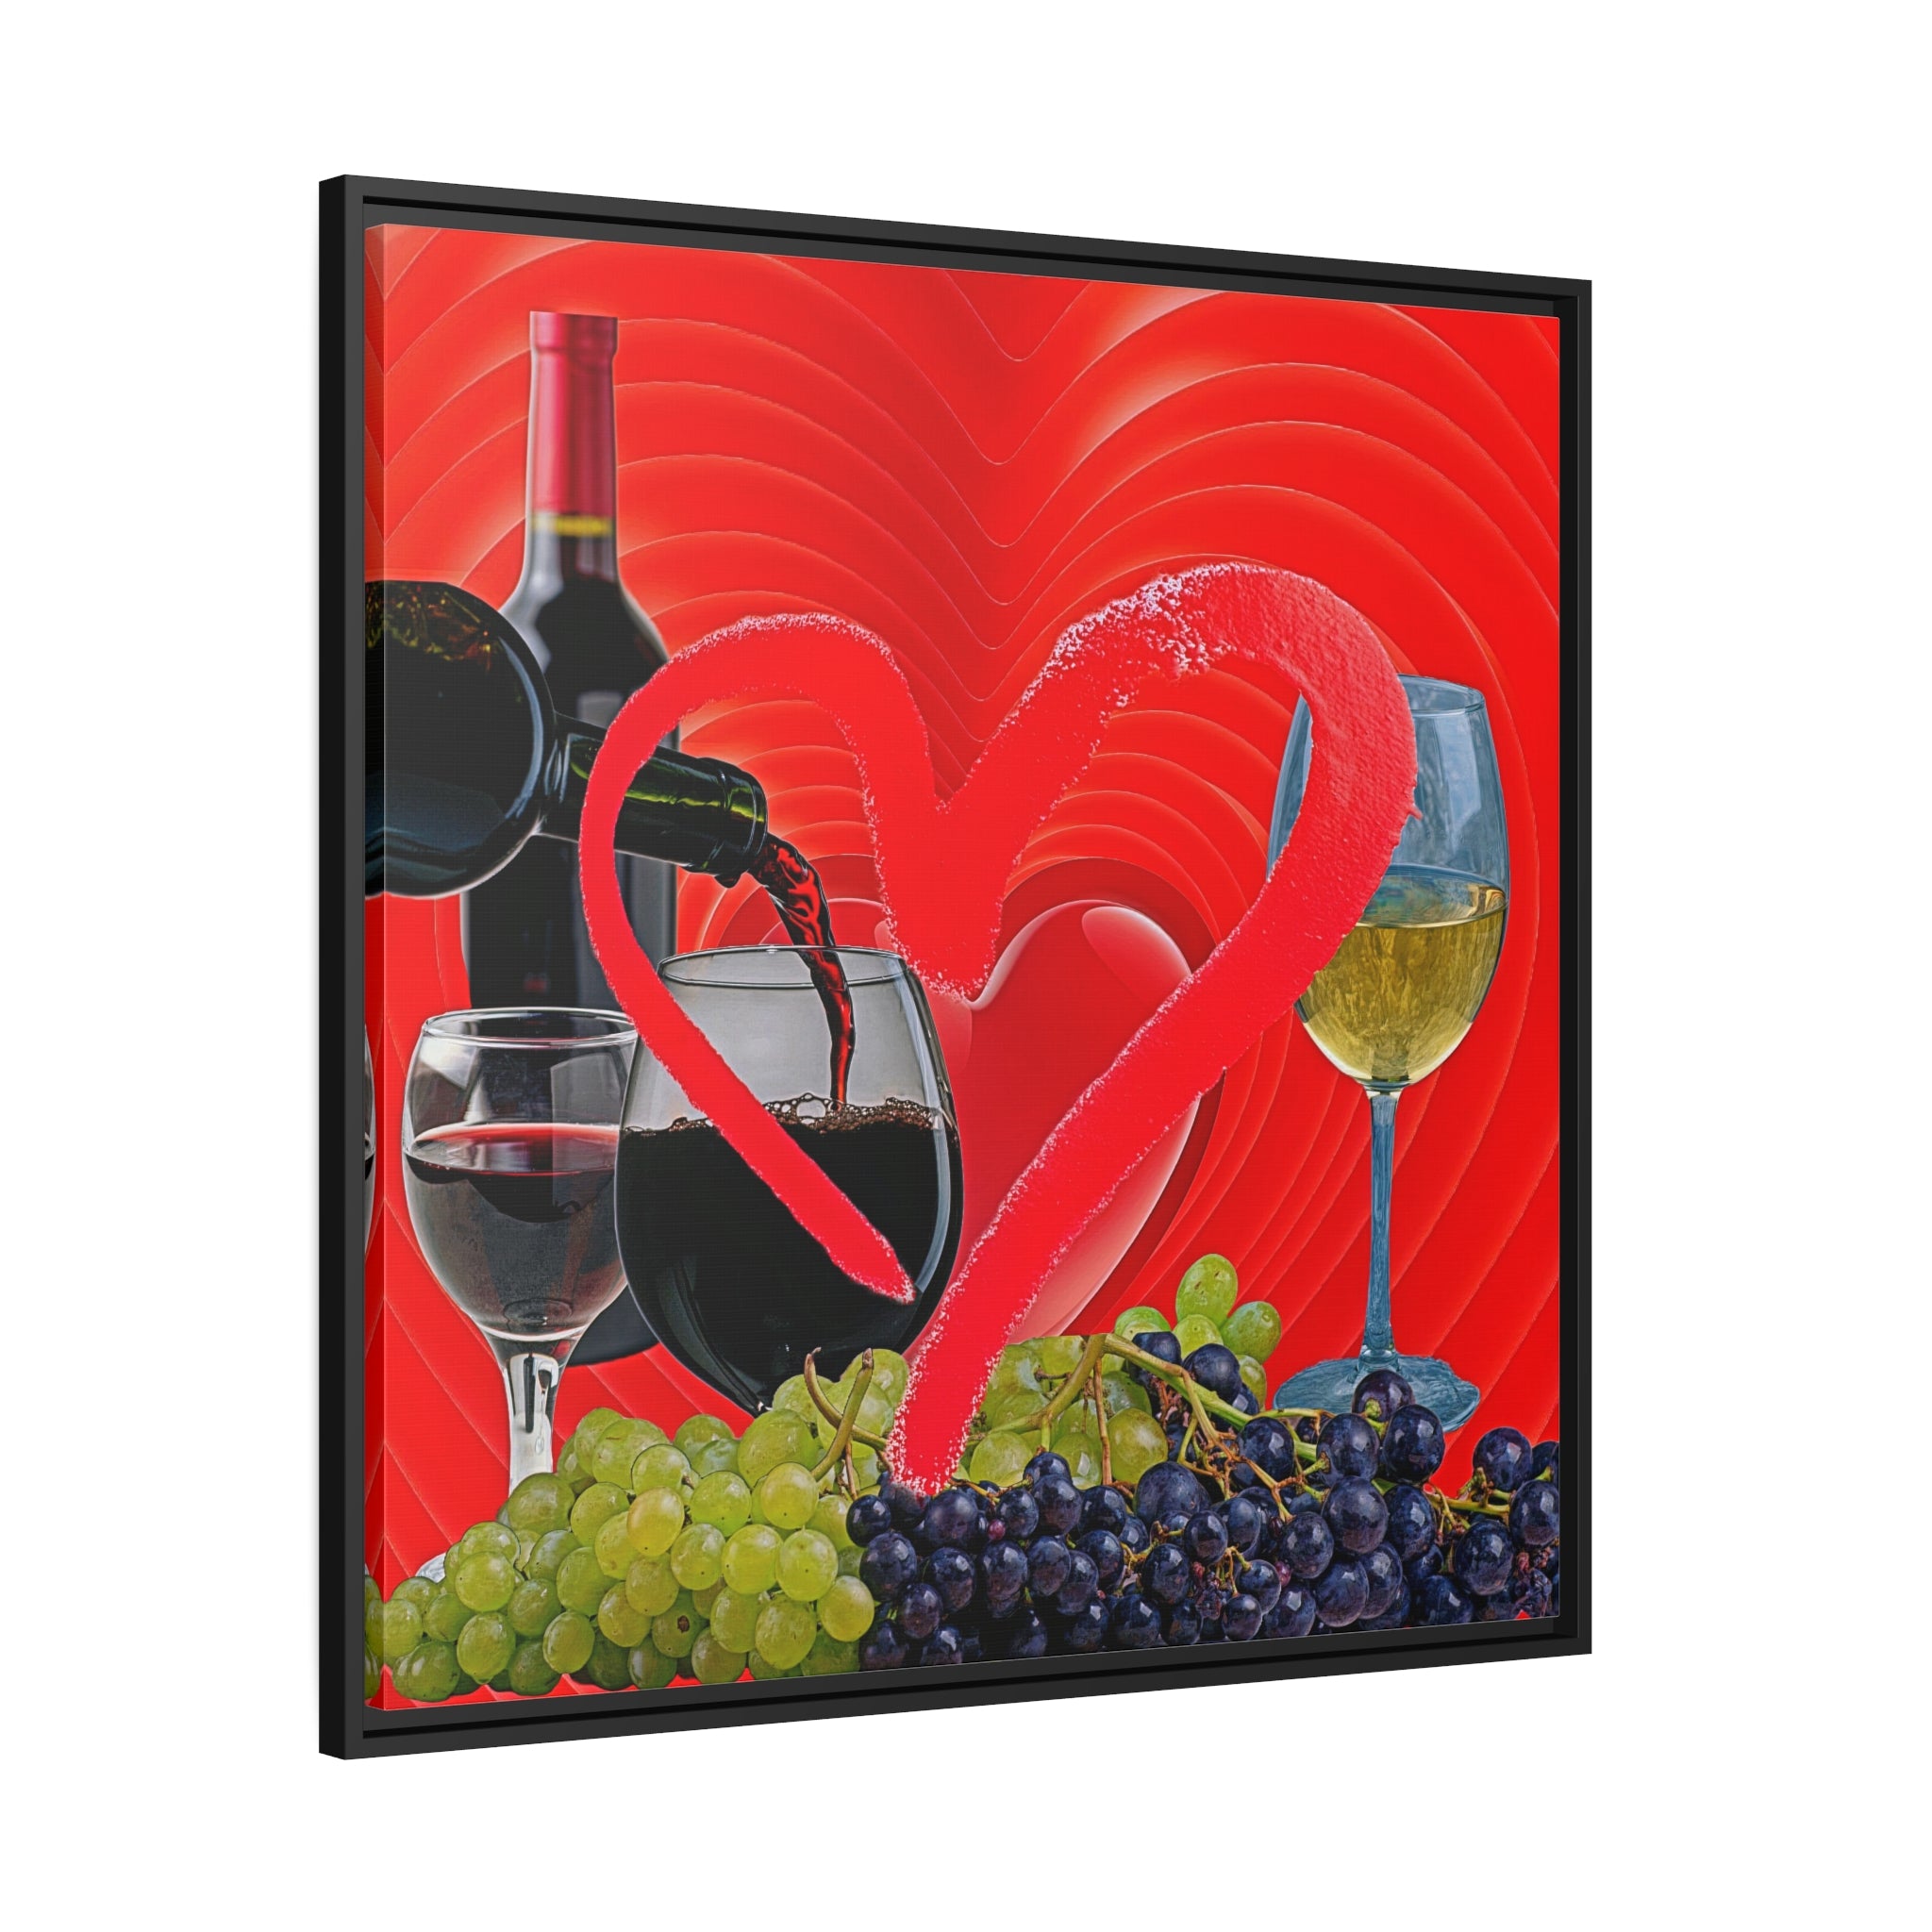 Wall Art LOVE WINE Painting Original Giclee Print Canvas 32X32 + Frame Nice Food Heart Beauty Fun Design Fit Hot House Home Living Office Gift Ready to Hang